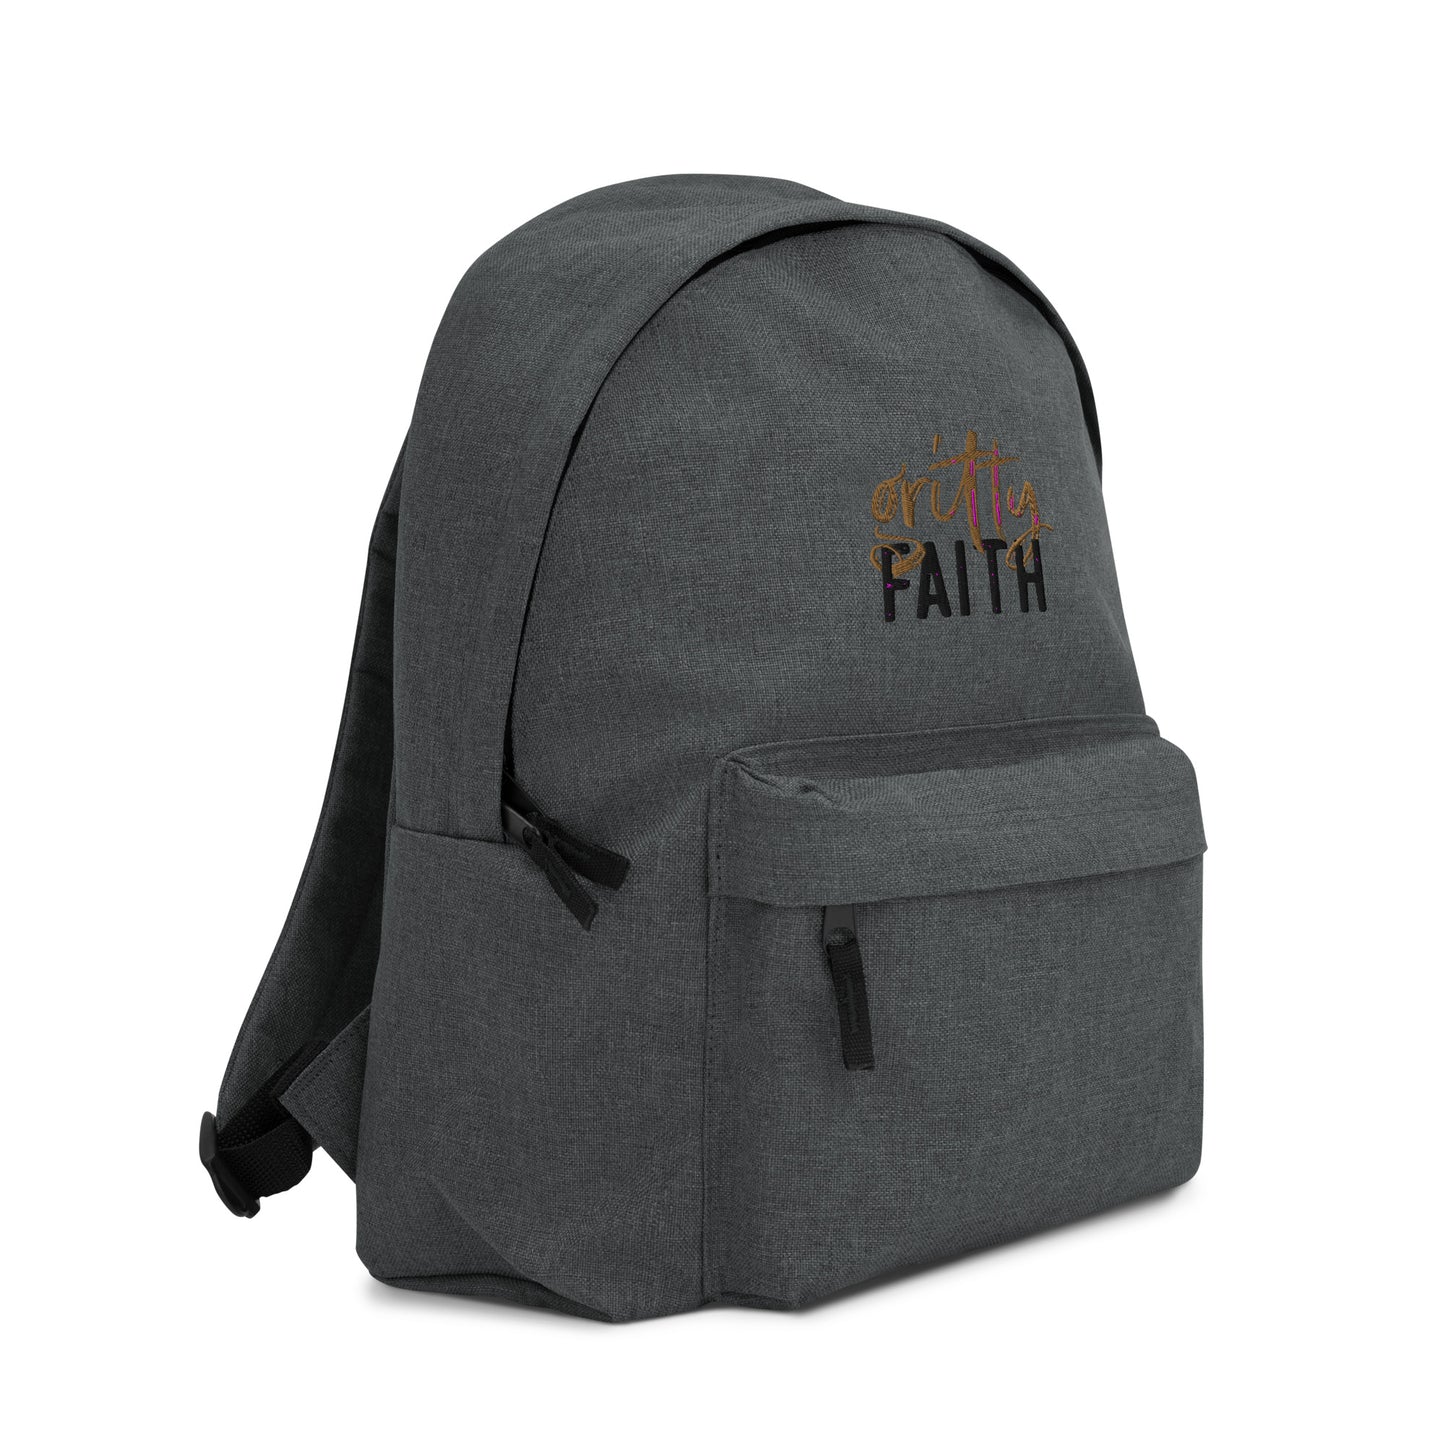 Gritty Faith Embroidered Backpack